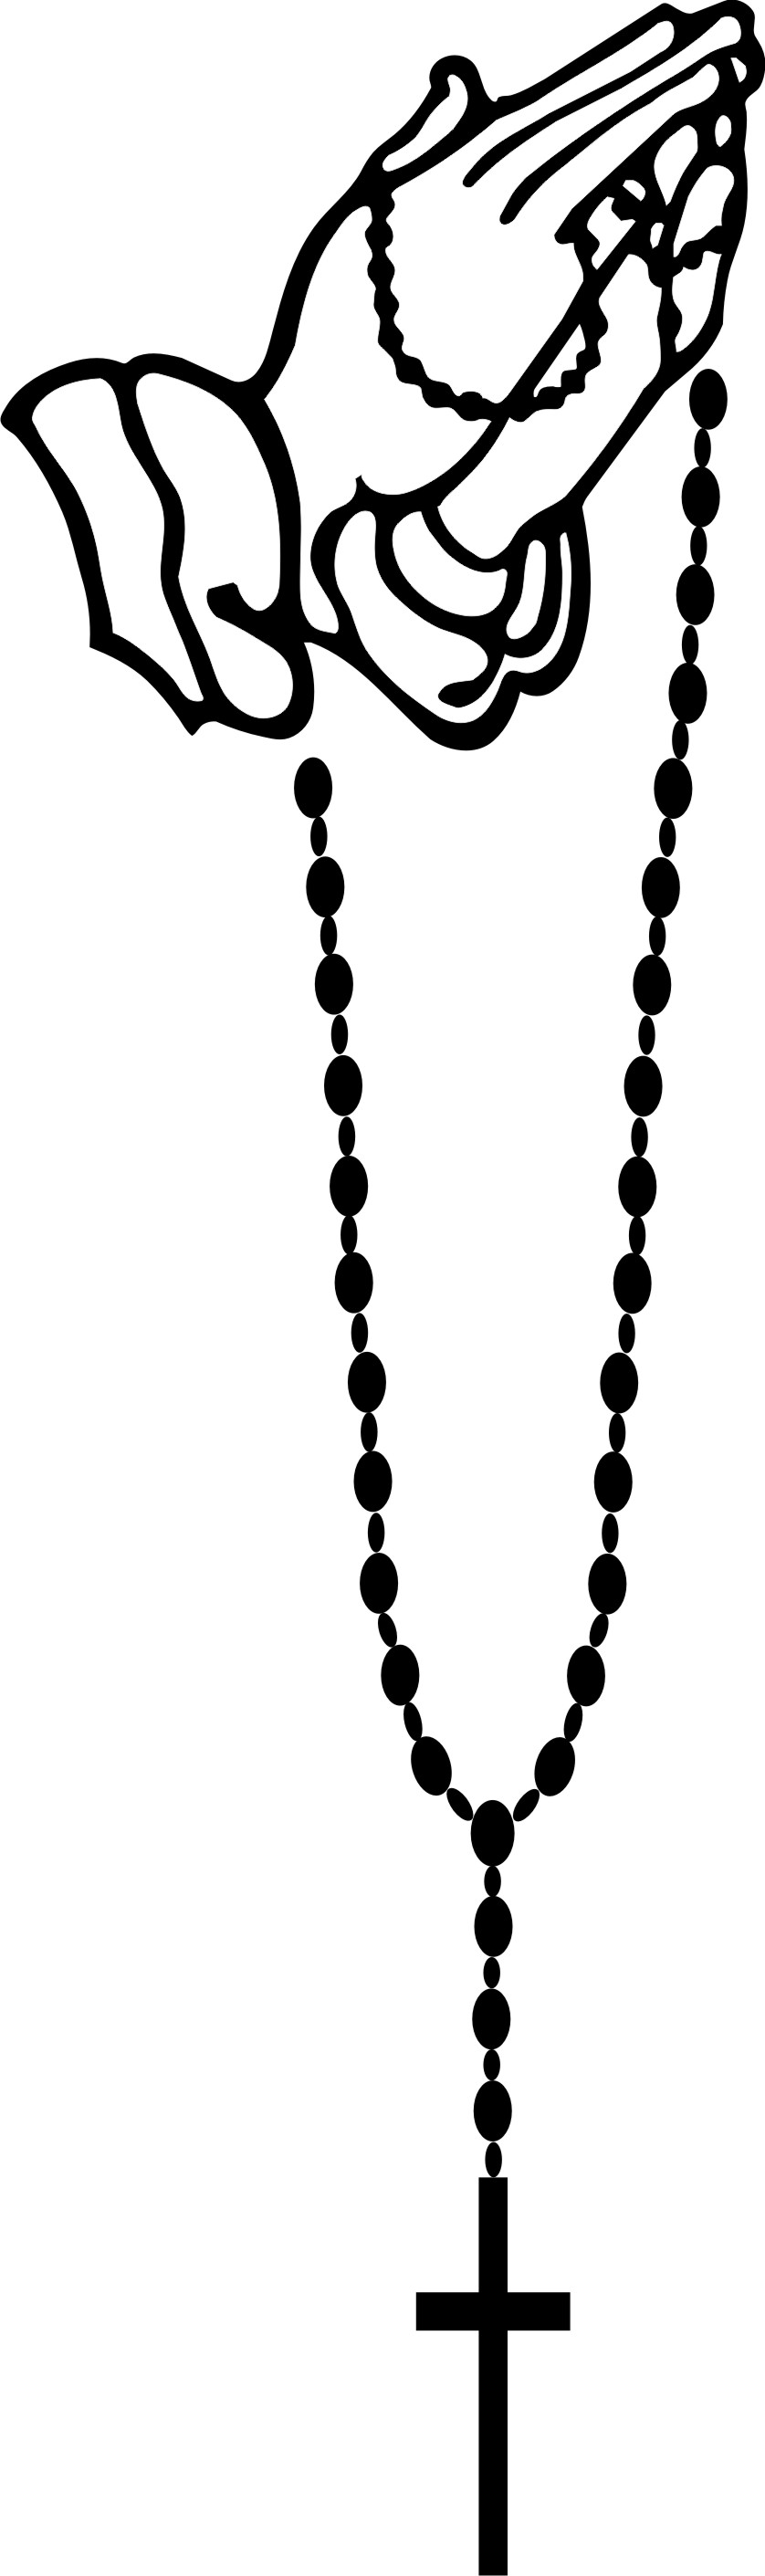 Necklace Clipart Single Bead Necklace Single Bead Transparent Free For Download On Webstockreview 2020 - roblox necklace transparent clip art library